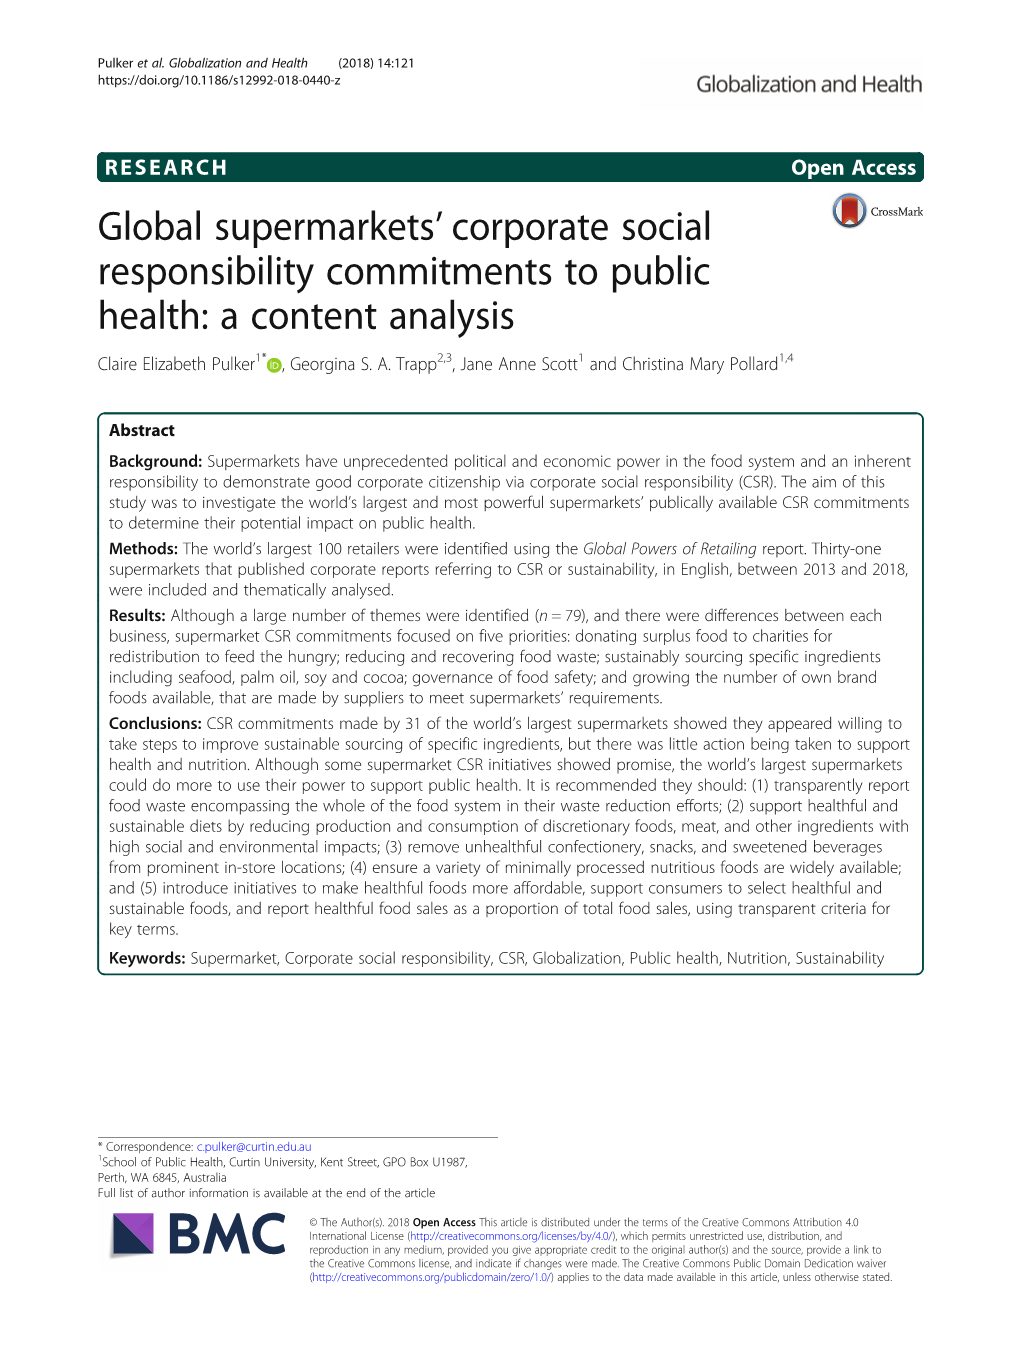 Global Supermarkets' Corporate Social Responsibility Commitments To